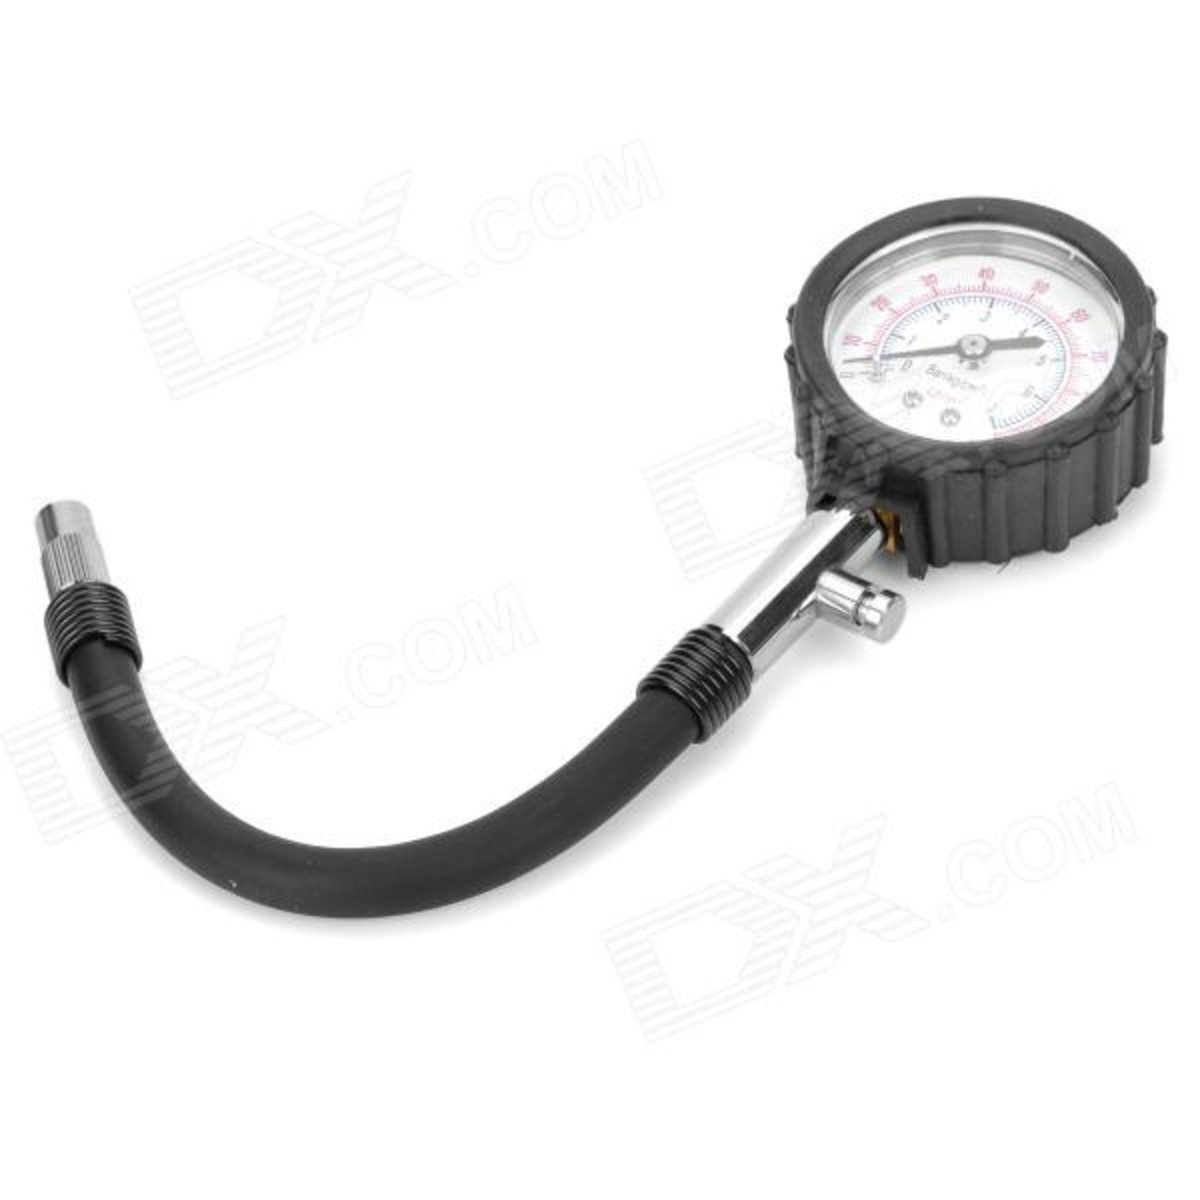 Keep a quality tire pressure gauge on hand to check your tire pressure at least once a month.